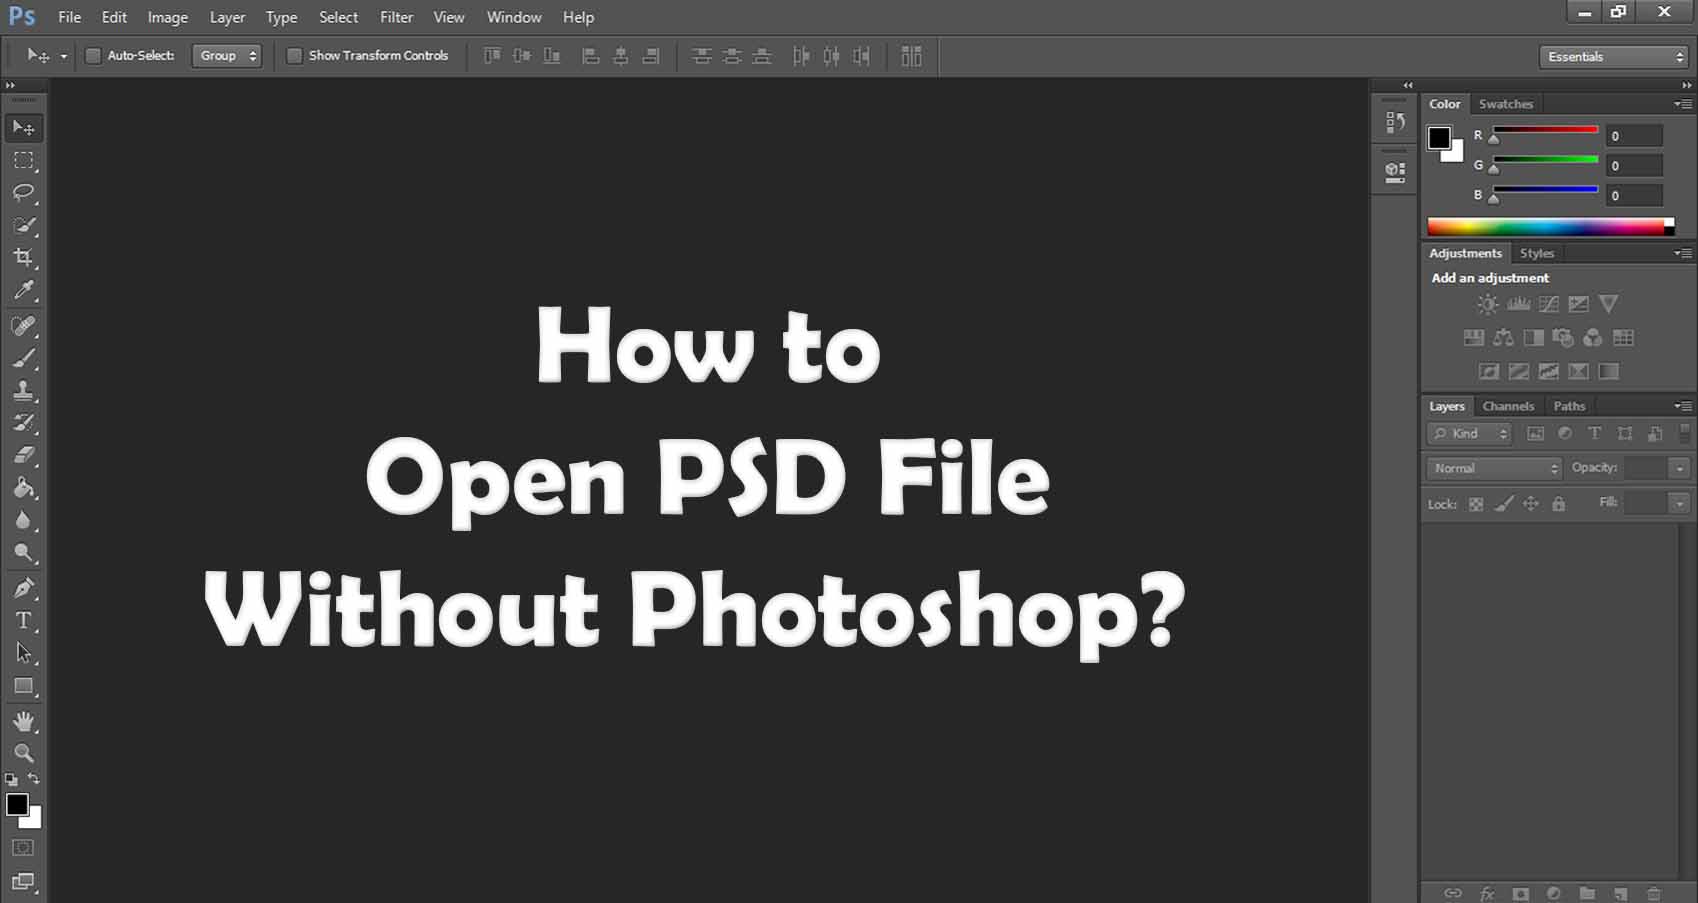 Open PSD File Without Photoshop